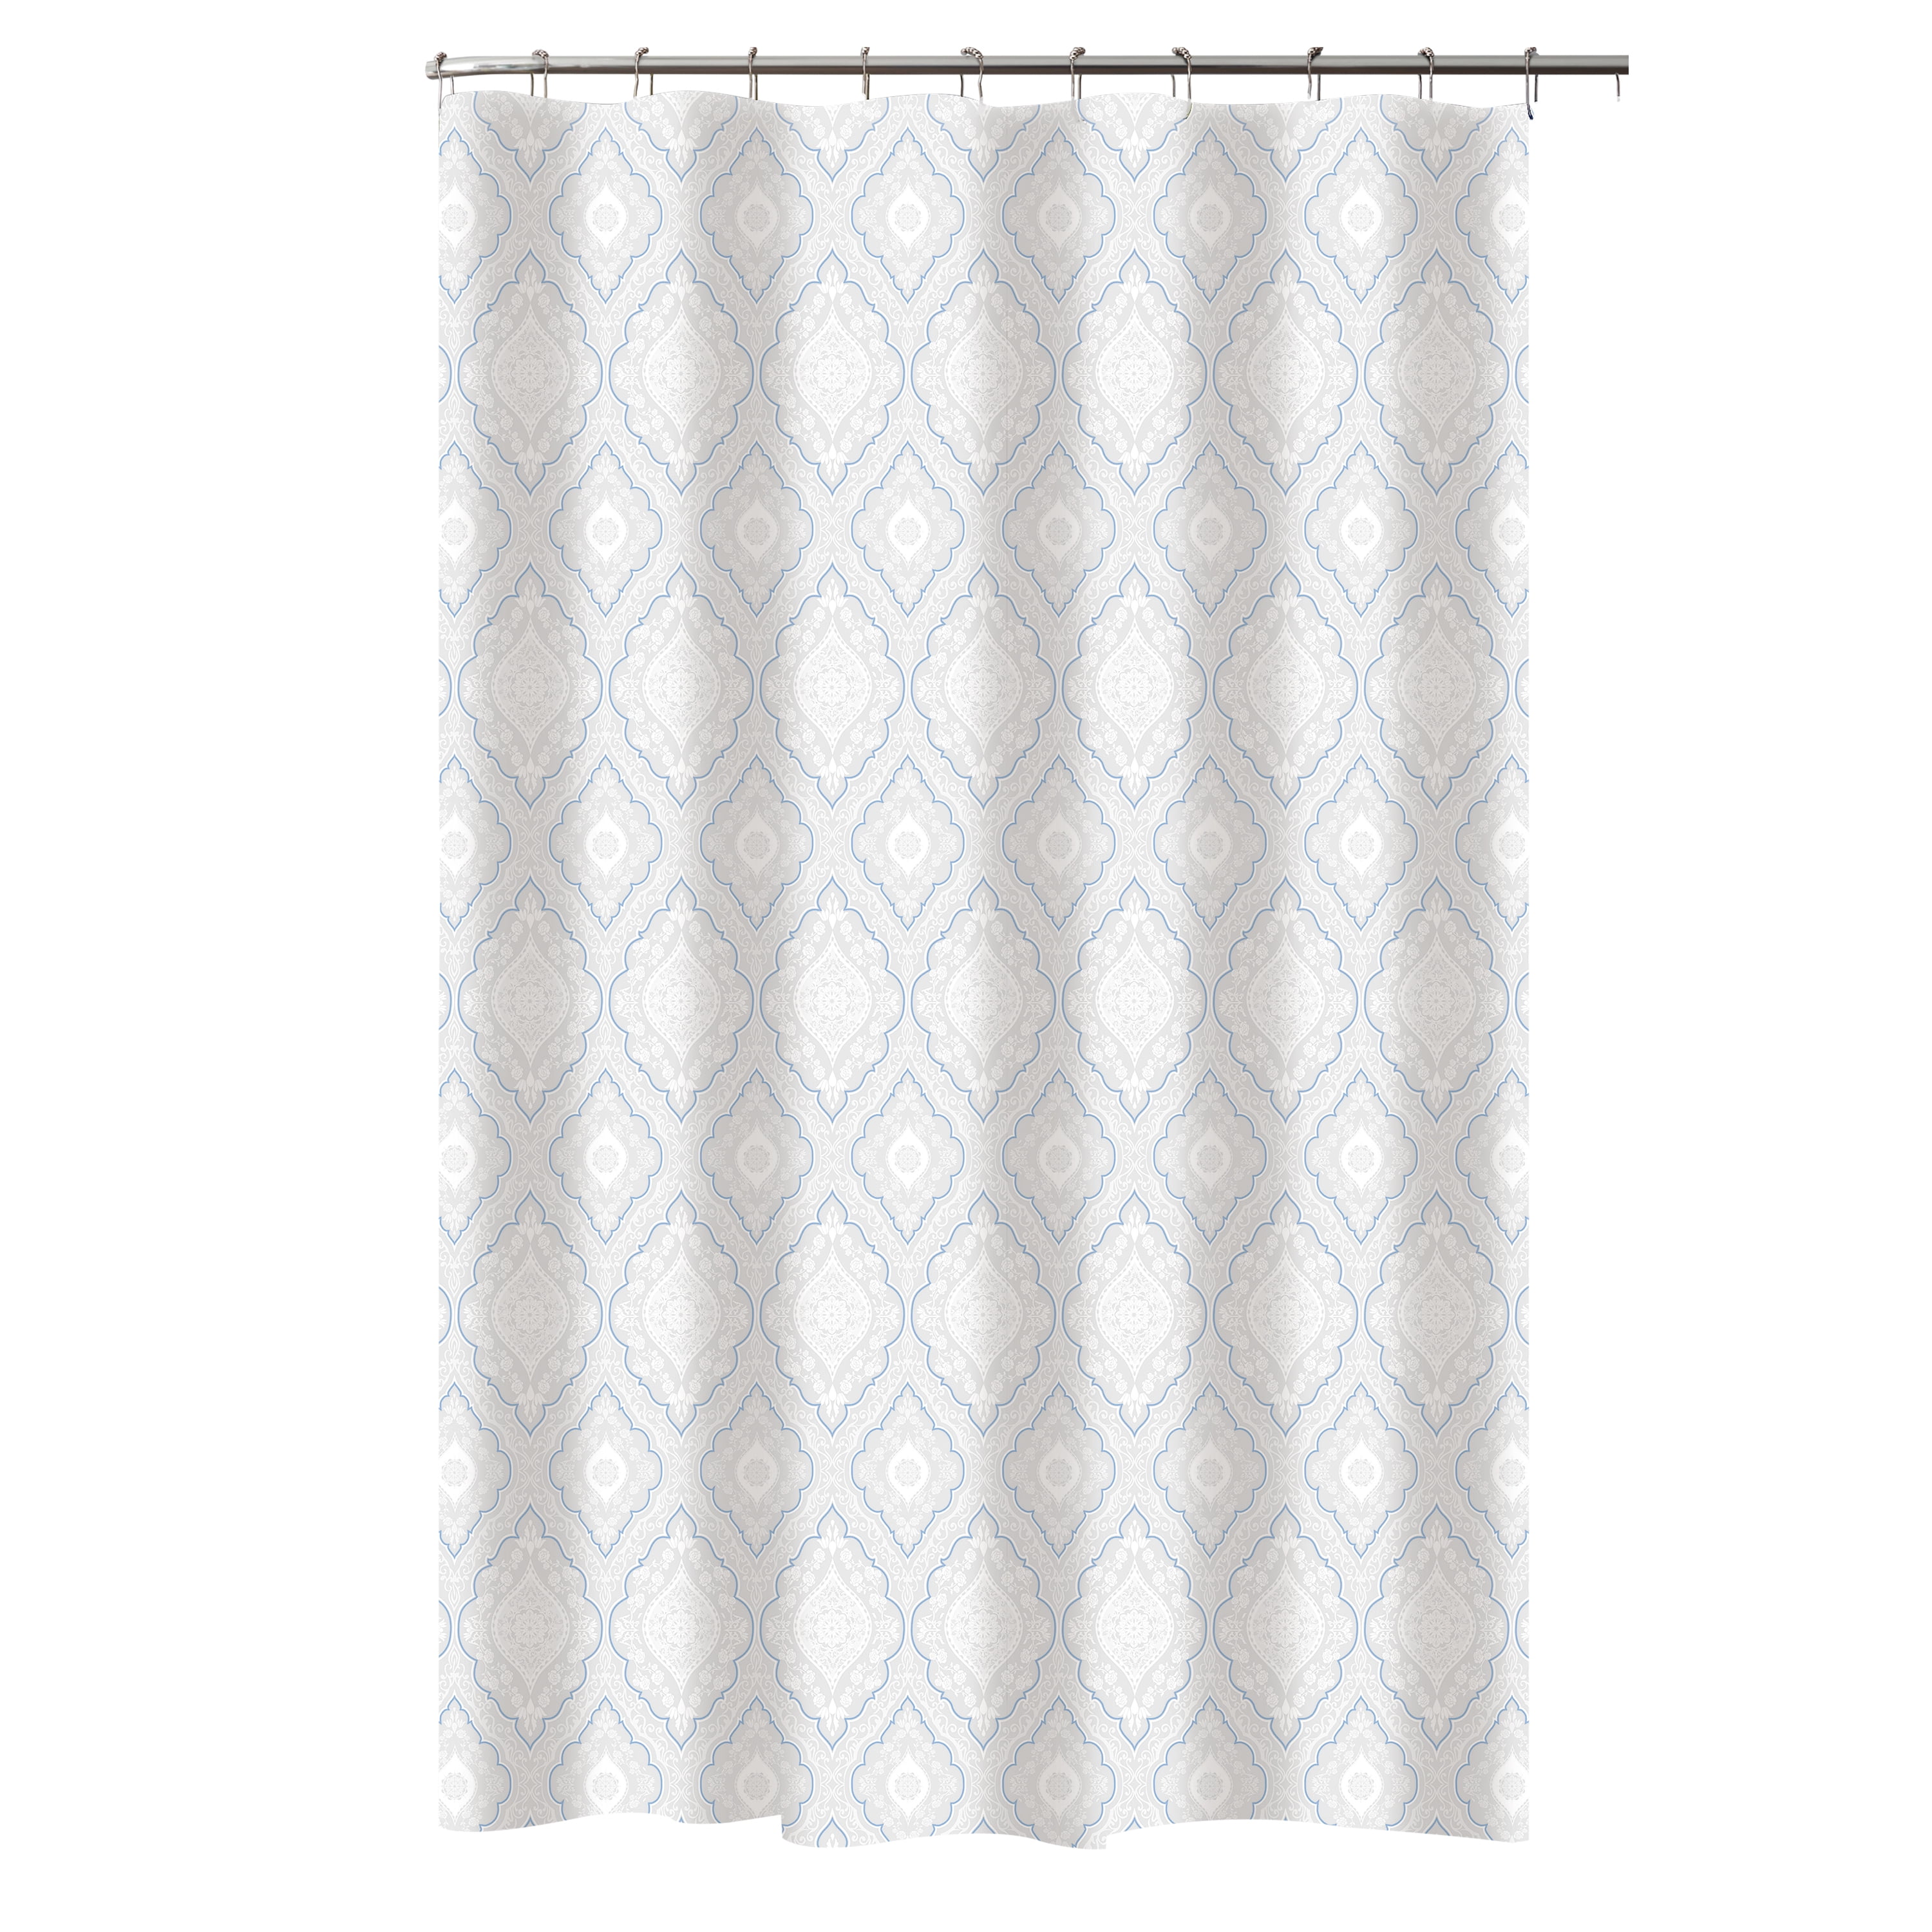 70" x 72" Blue Moroccan Tile Design White and Blue Fabric Shower Curtain 